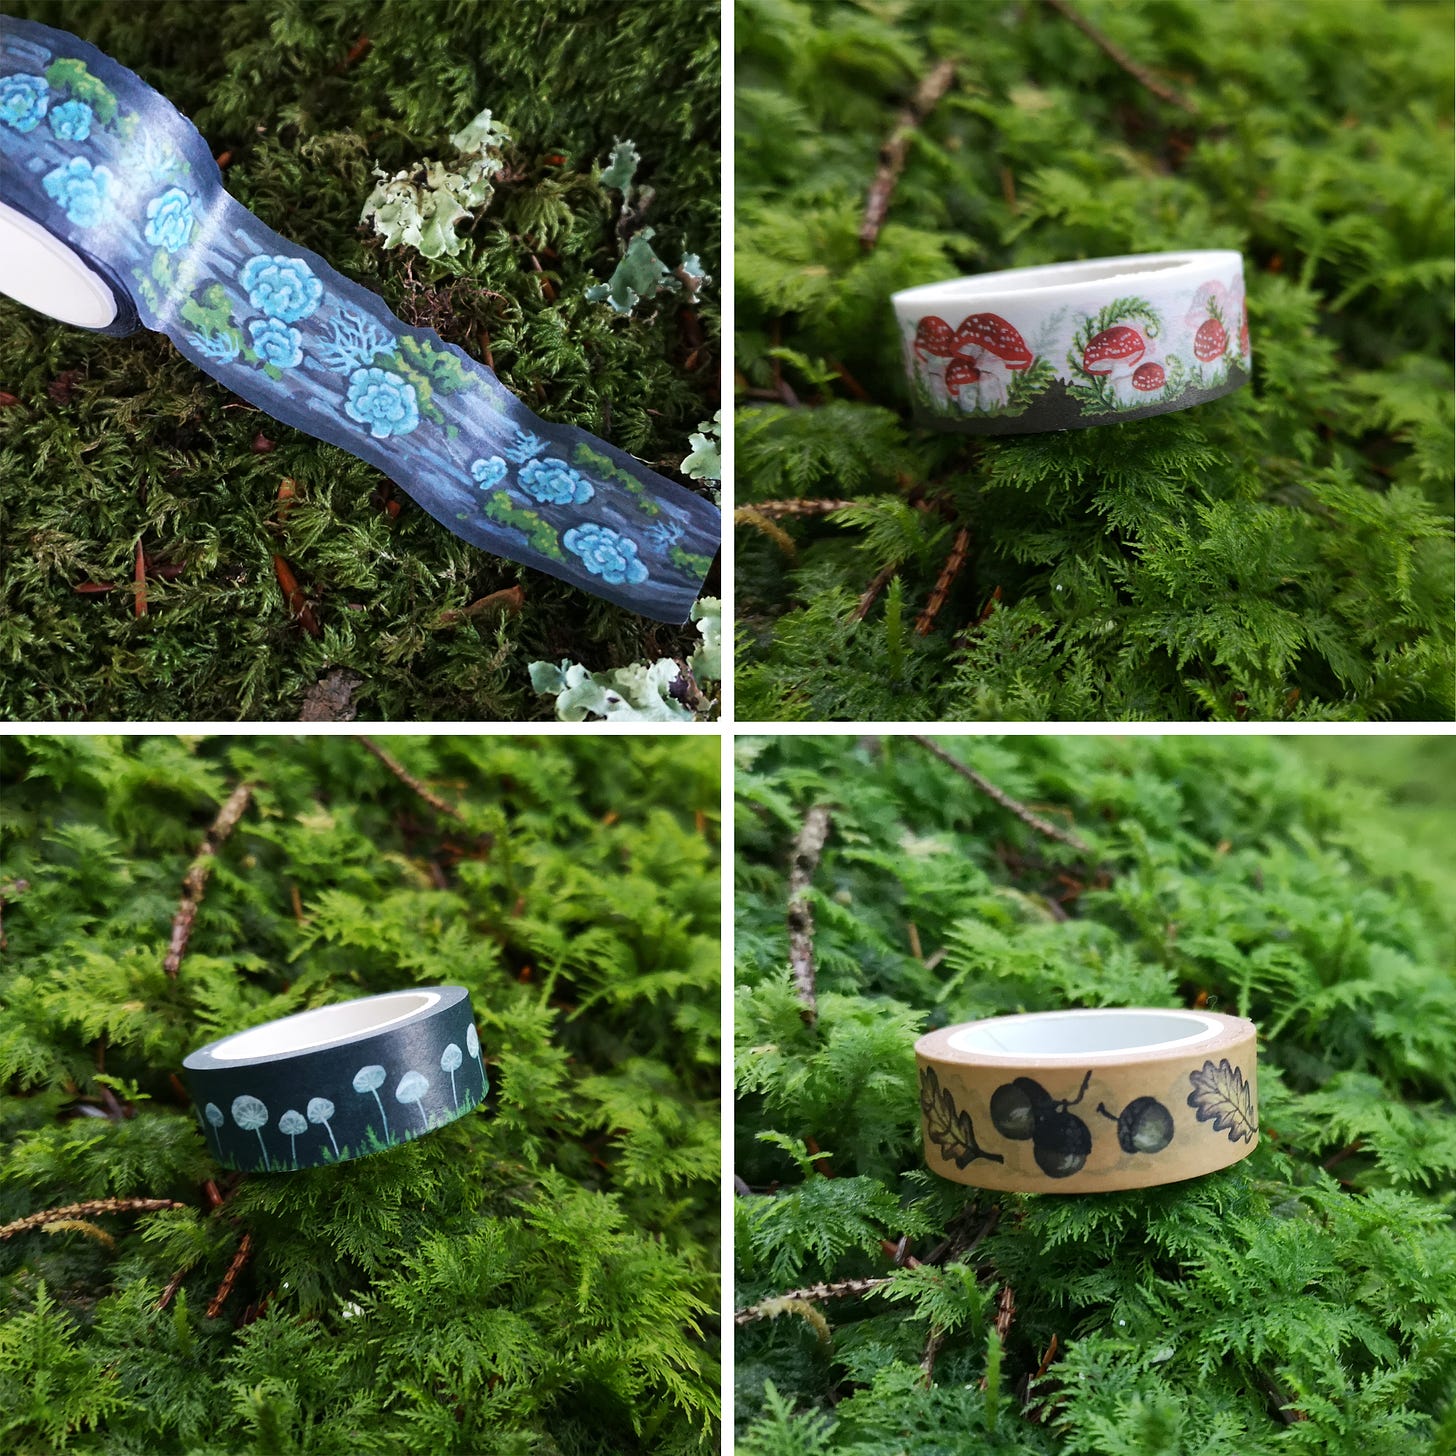 Image descriptions: 1) a little roll of narrow illustrated tape sitting in the moss. The background is what and the images are a parade of red and whit fly agaric mushrooms growing out of green moss, surrounded by bracken. 2) Another washi tape in the moss, this time with a dark blue background and tiny translucent white mushrooms growing out of the moss. 3) a wider washi tape with a little bit unrolled, lying on some moss sprinkled with lichen. The tape has a wobbly edge, and shows a continuous tree trunk adorned with mossy clumps and pale green lichens. 4) A gold background washi tape with brown and yellow autumnal acorns and oak leaves sitting in the moss.